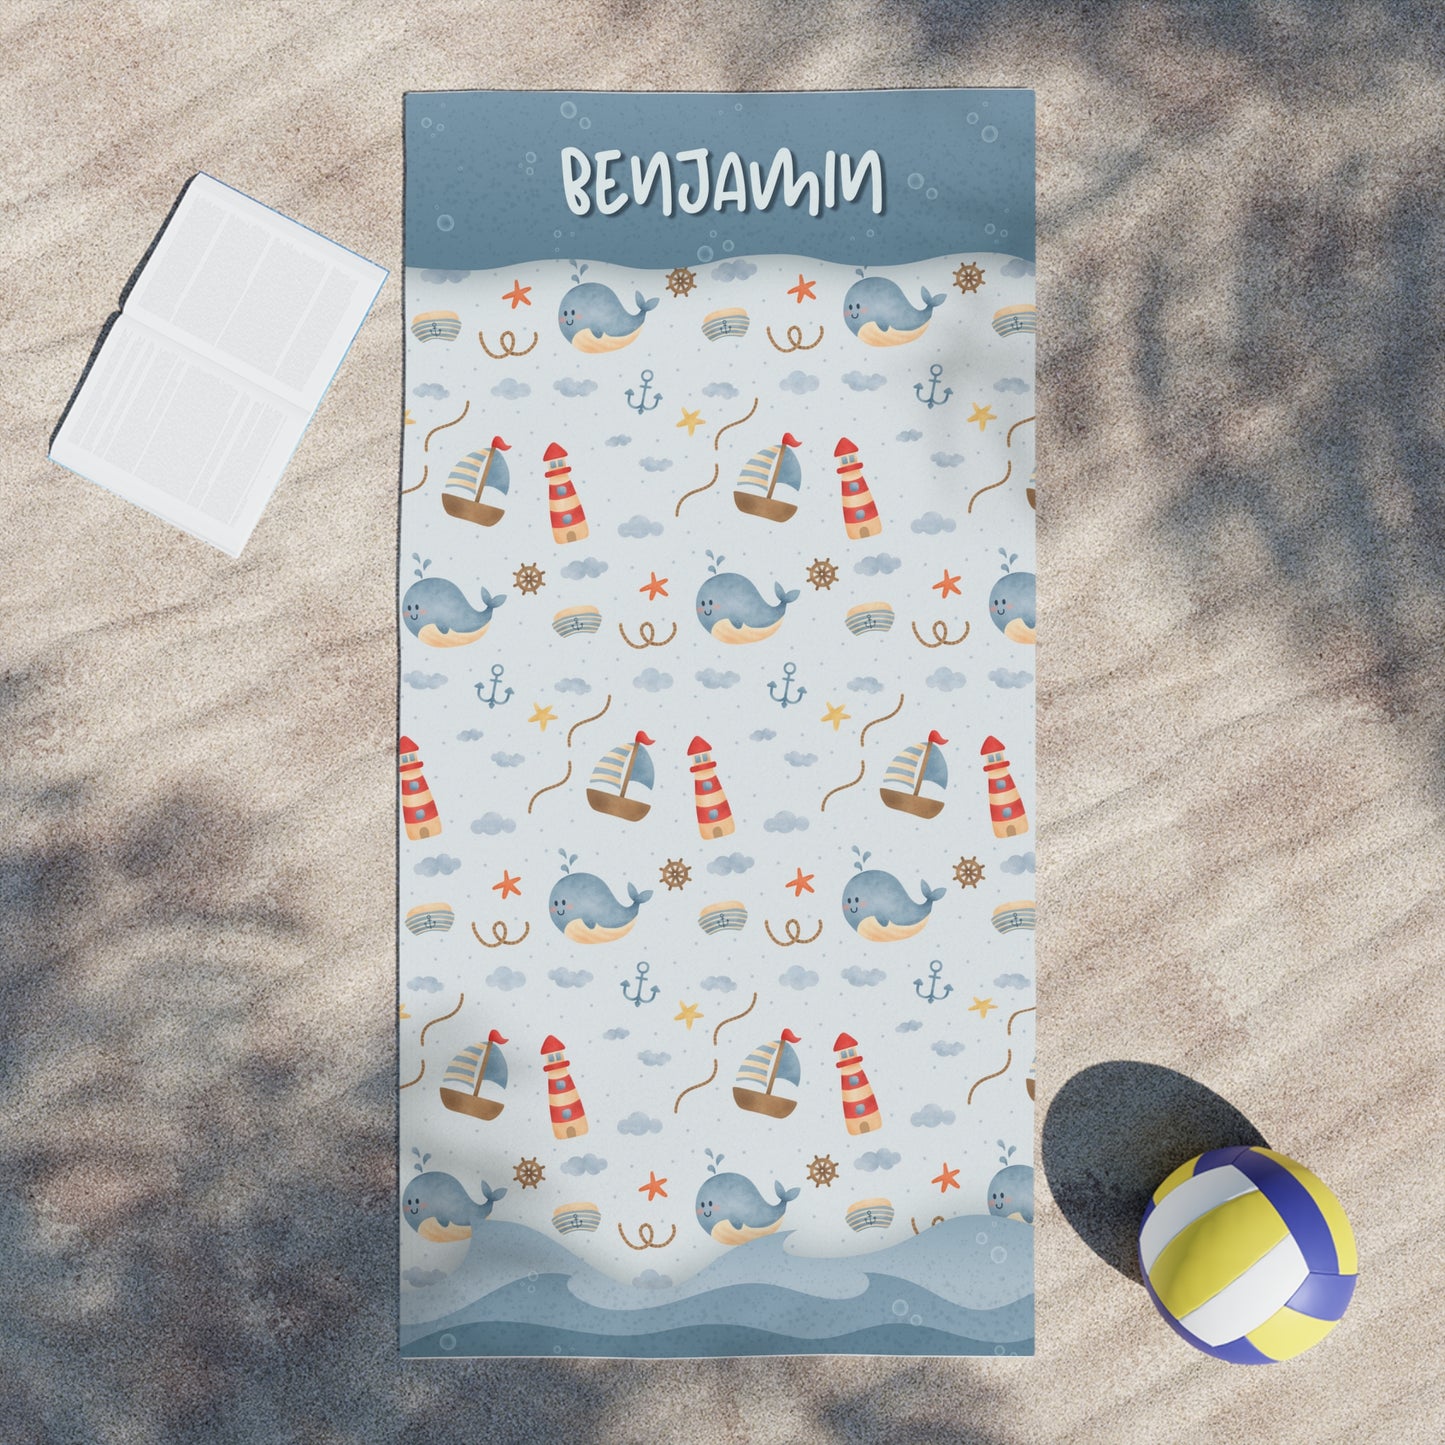 Whale Sailing Personalized Towel